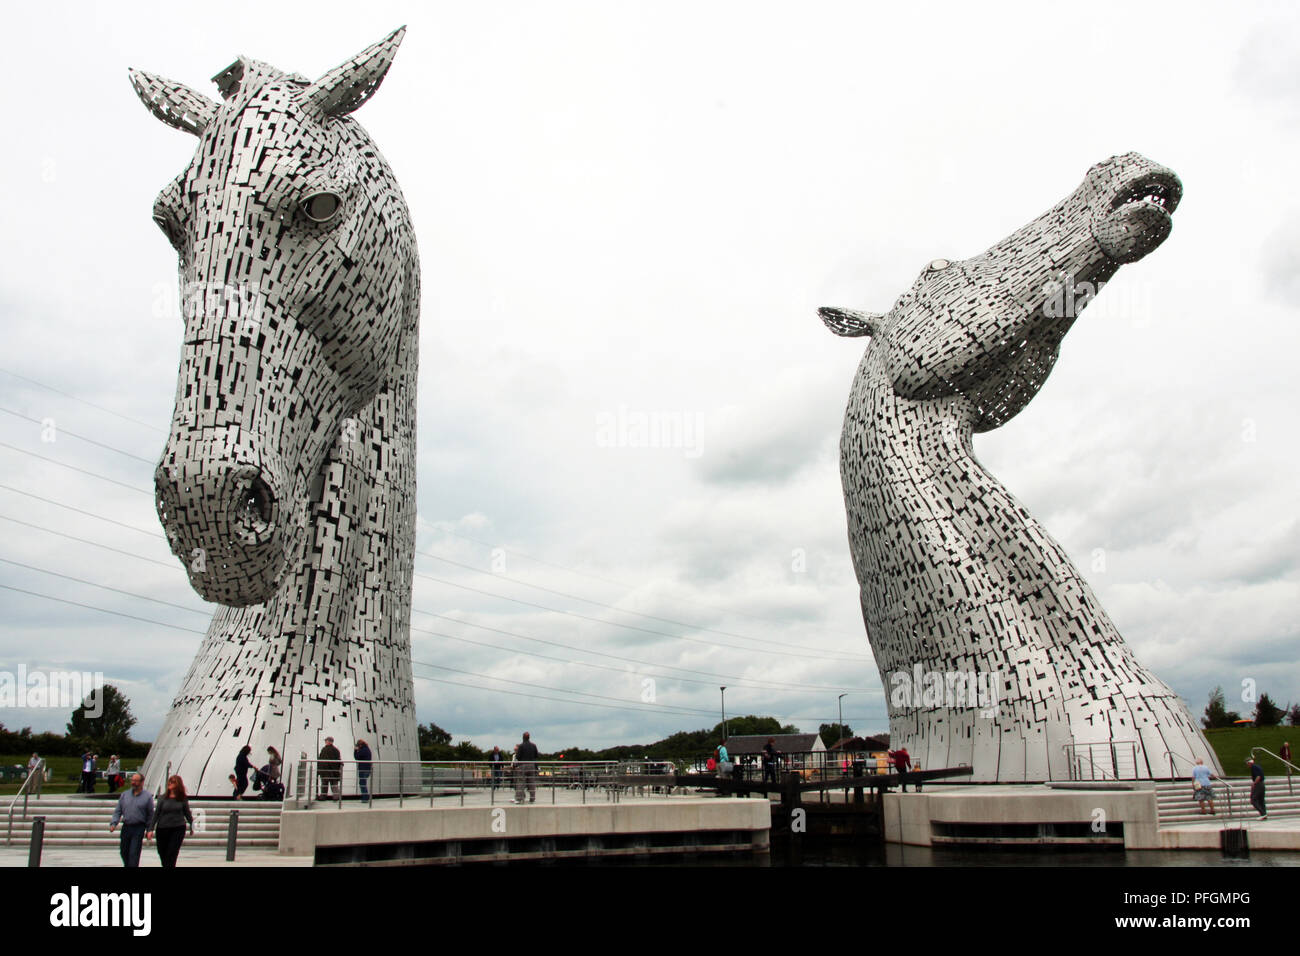 The two huge Kelpie horse sculptures that sit on the Forth and Clyde canal in Helix Park, Falkirk in Scotland. They were designed and built by Andy Scott and are now a major Scottish attraction with tourists and visitors. Stock Photo